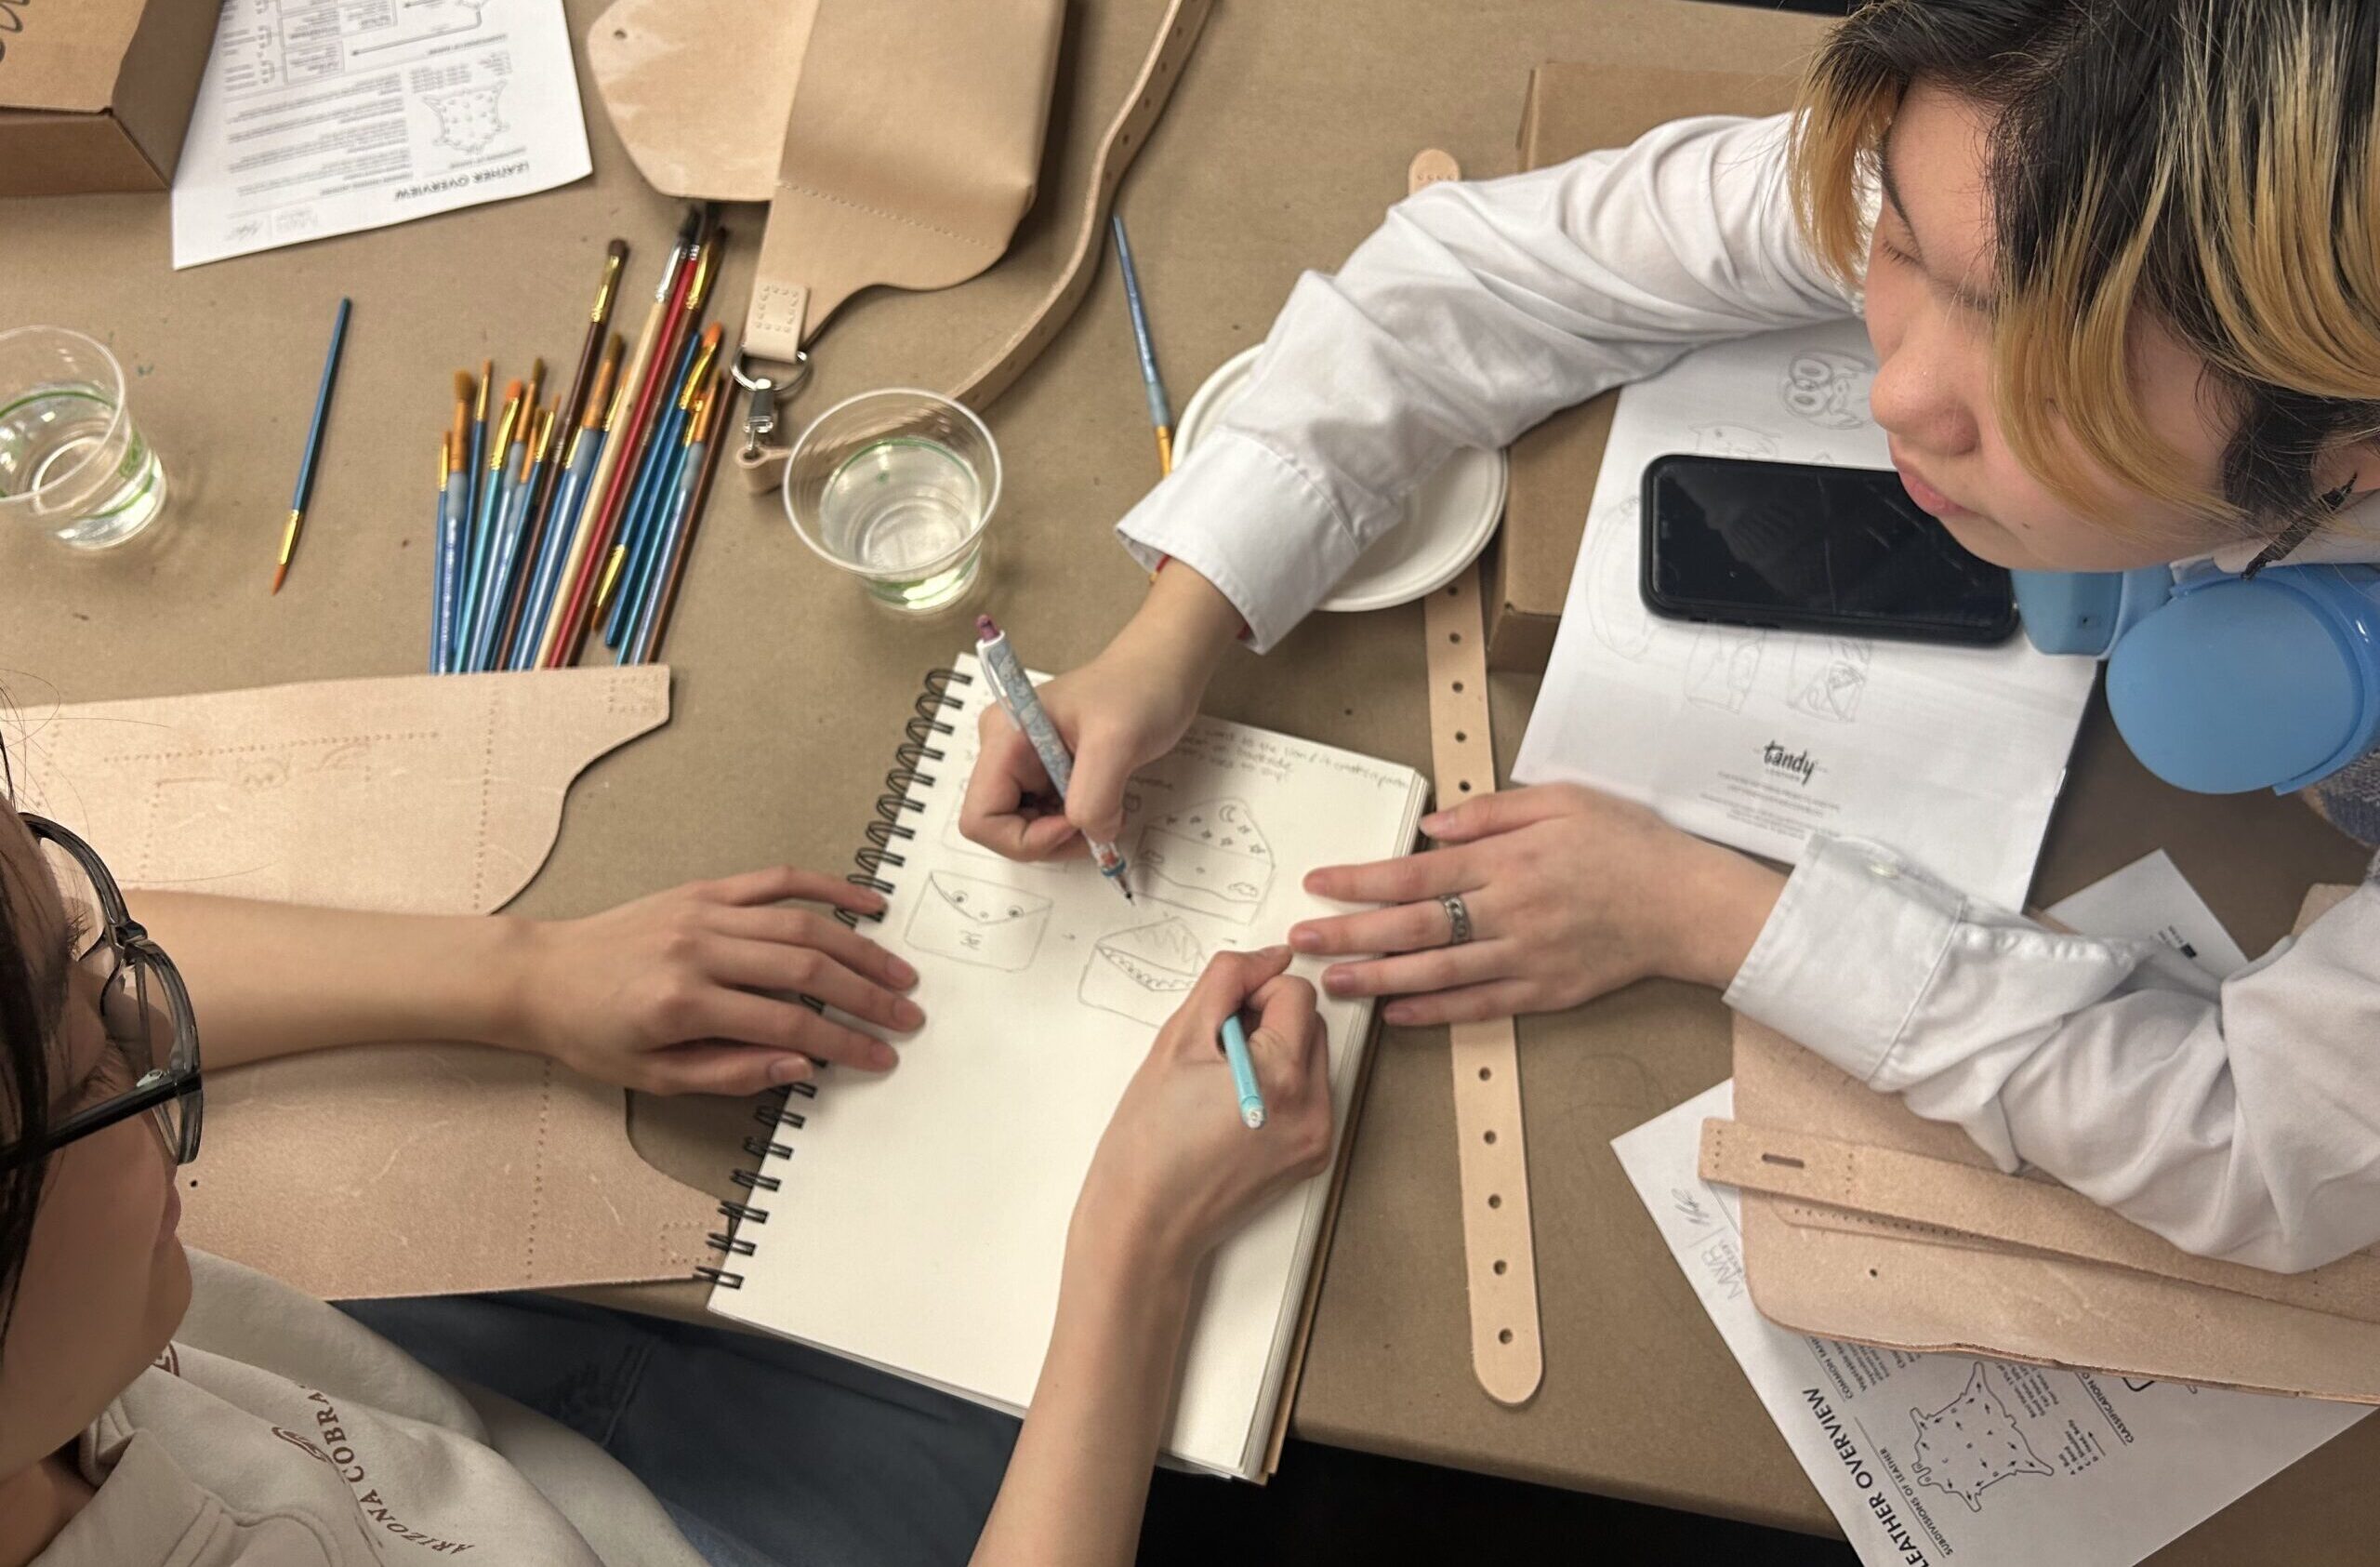 A photograph of a bird's eye view of two medium-skin toned teenagers sitting at a table and drawing on a notepad. They are drawing something in the shape of an envelope. Around them are materials such as paint brushes, leather straps and sheets, and worksheets on how to construct a leather accessory.